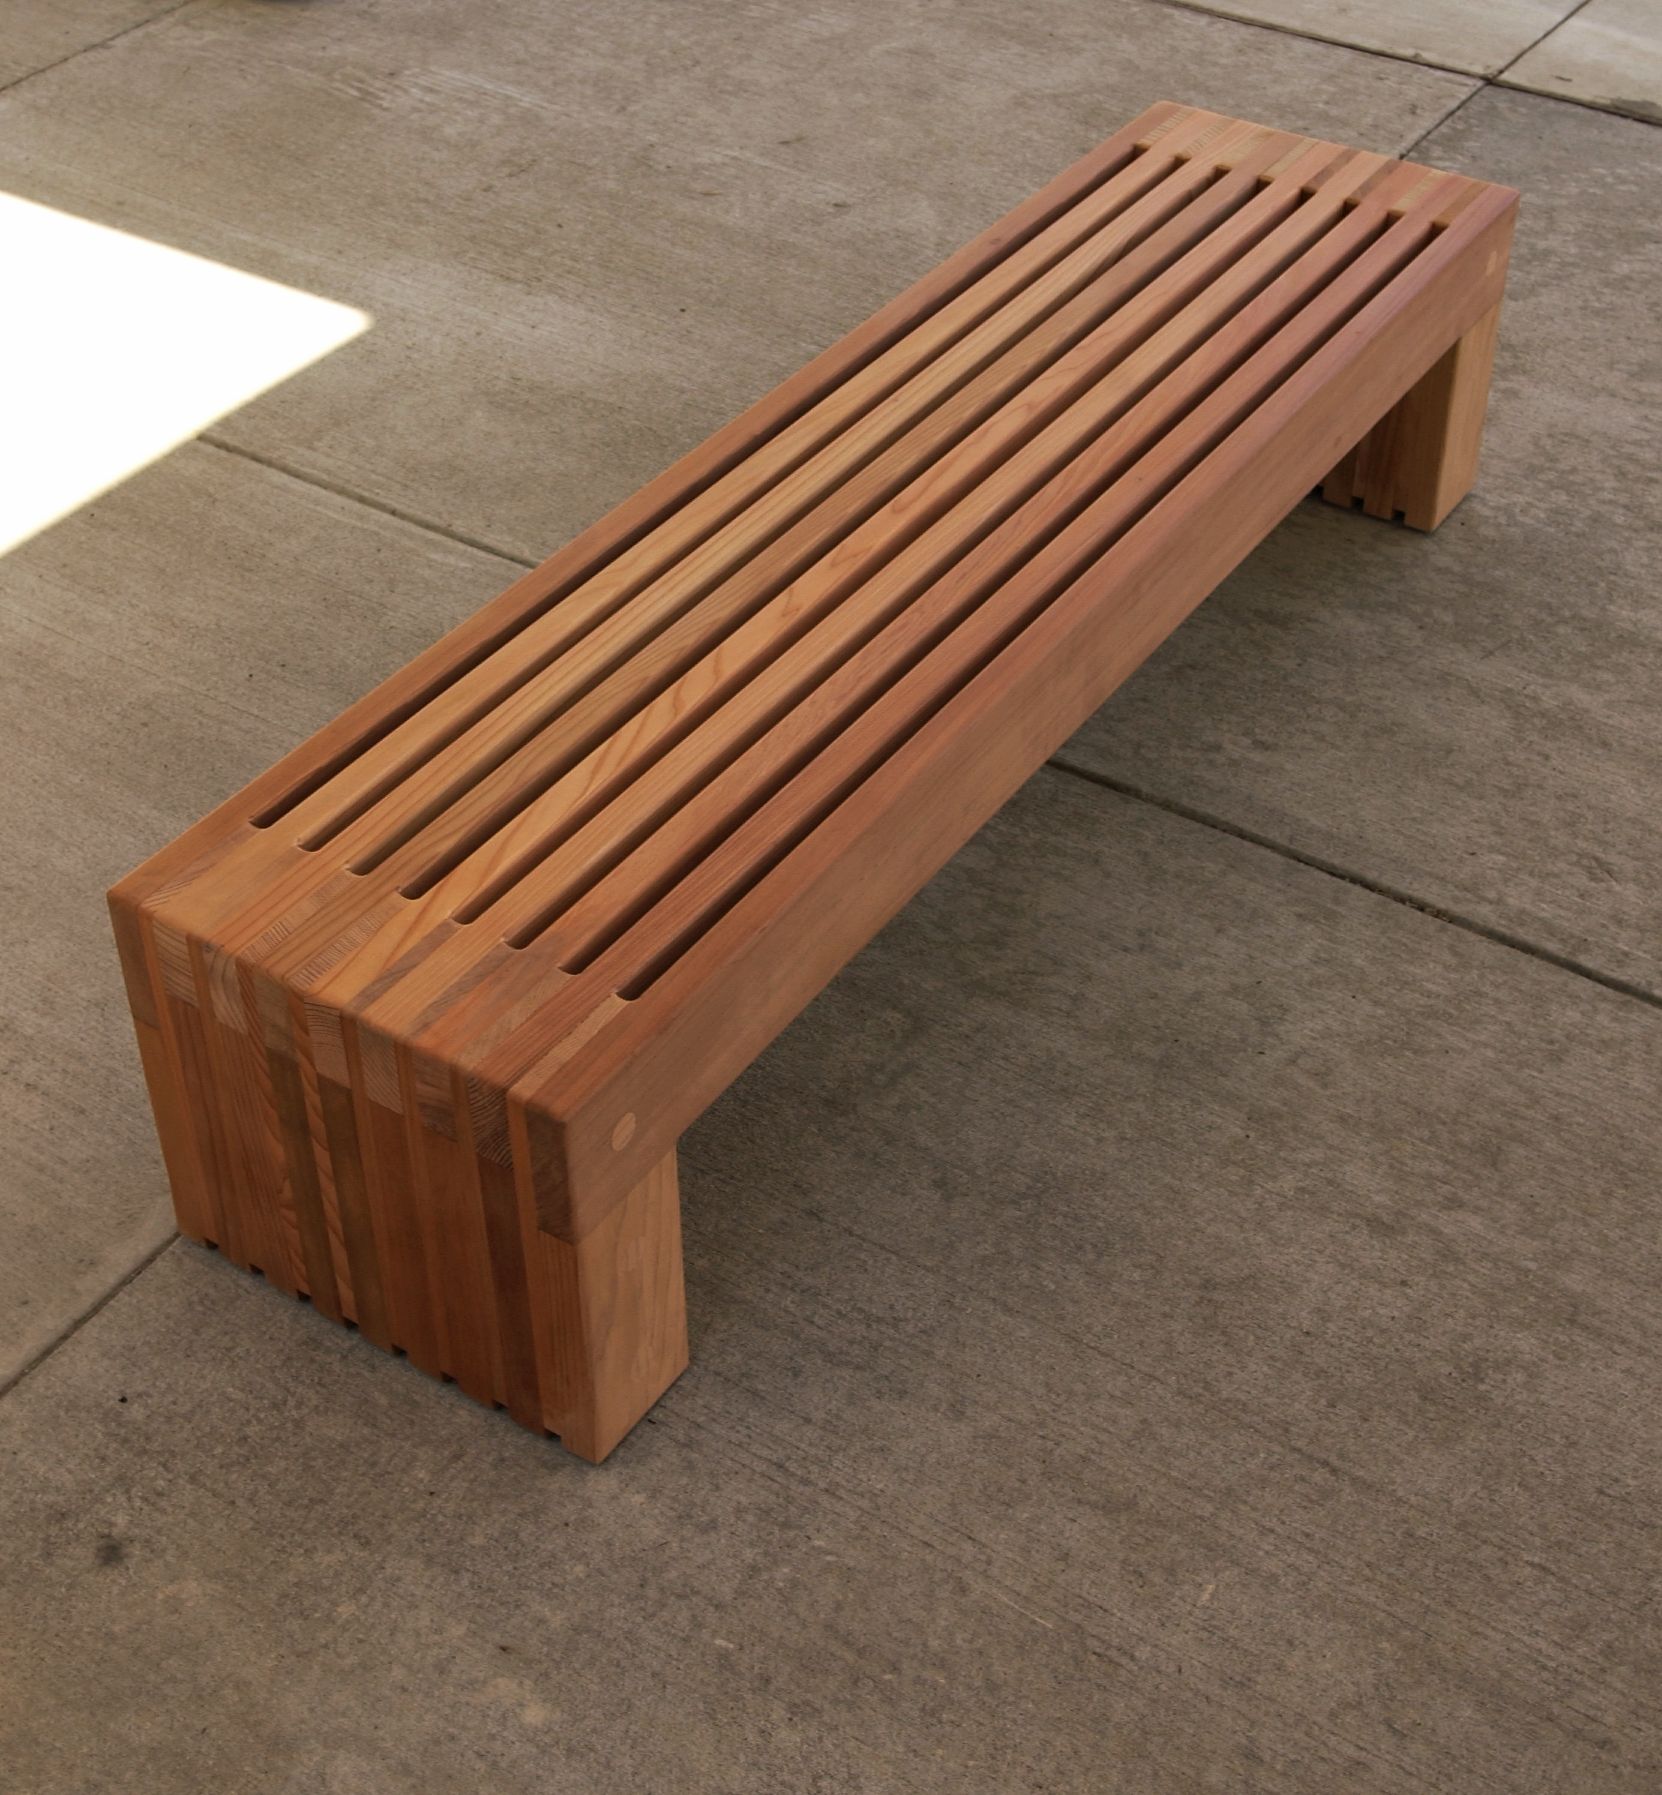 Summer is Coming, So You Need a Bench Like This | Bench designs ...